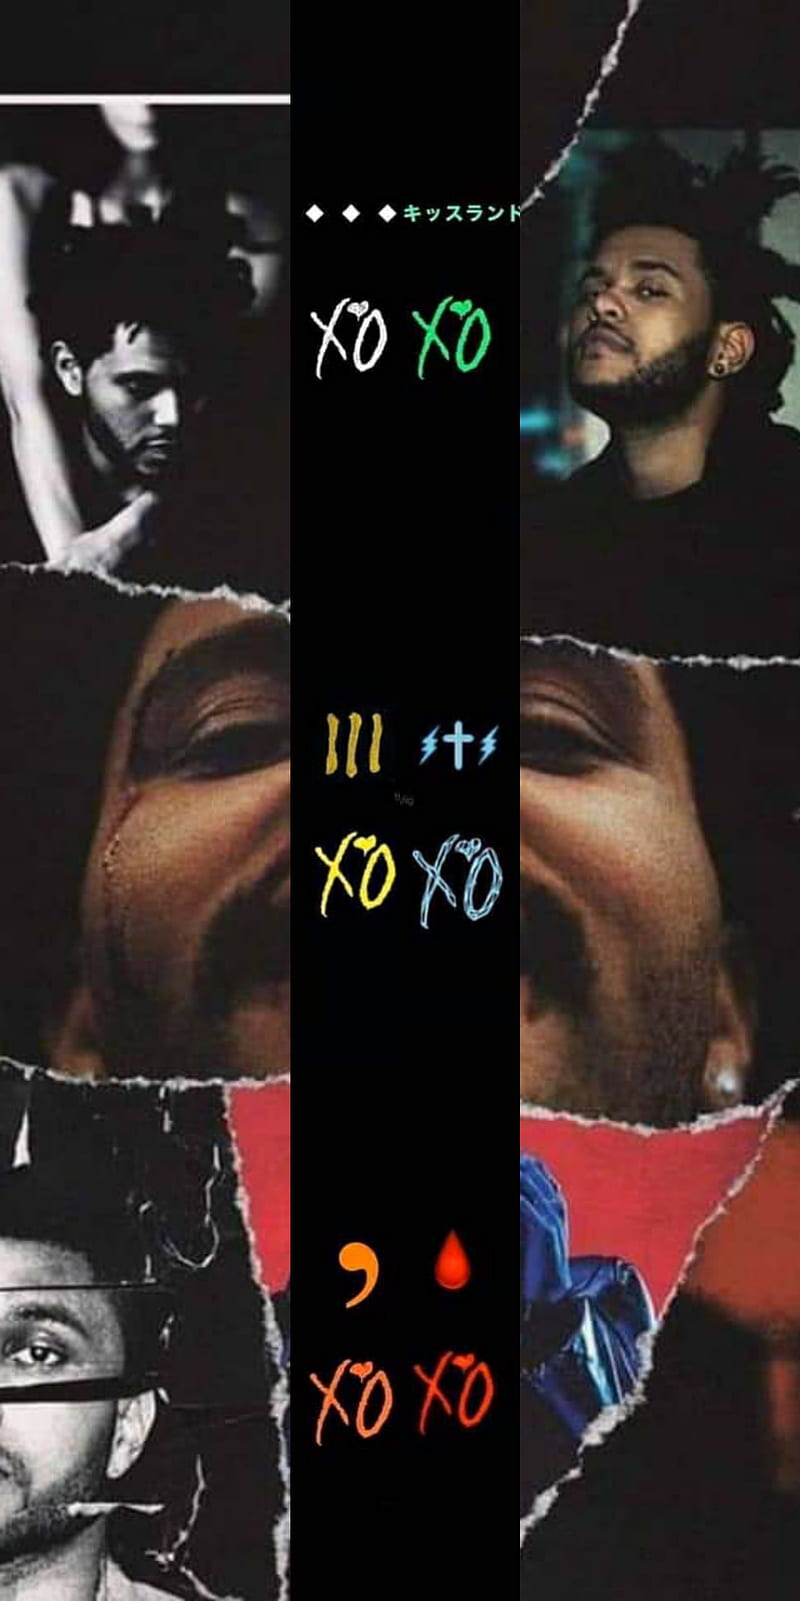 The Weeknd Wallpaper Browse The Weeknd Wallpaper with collections of  Aesthetic Desktop Iphone Pink The W  The weeknd poster The weeknd The  weeknd background